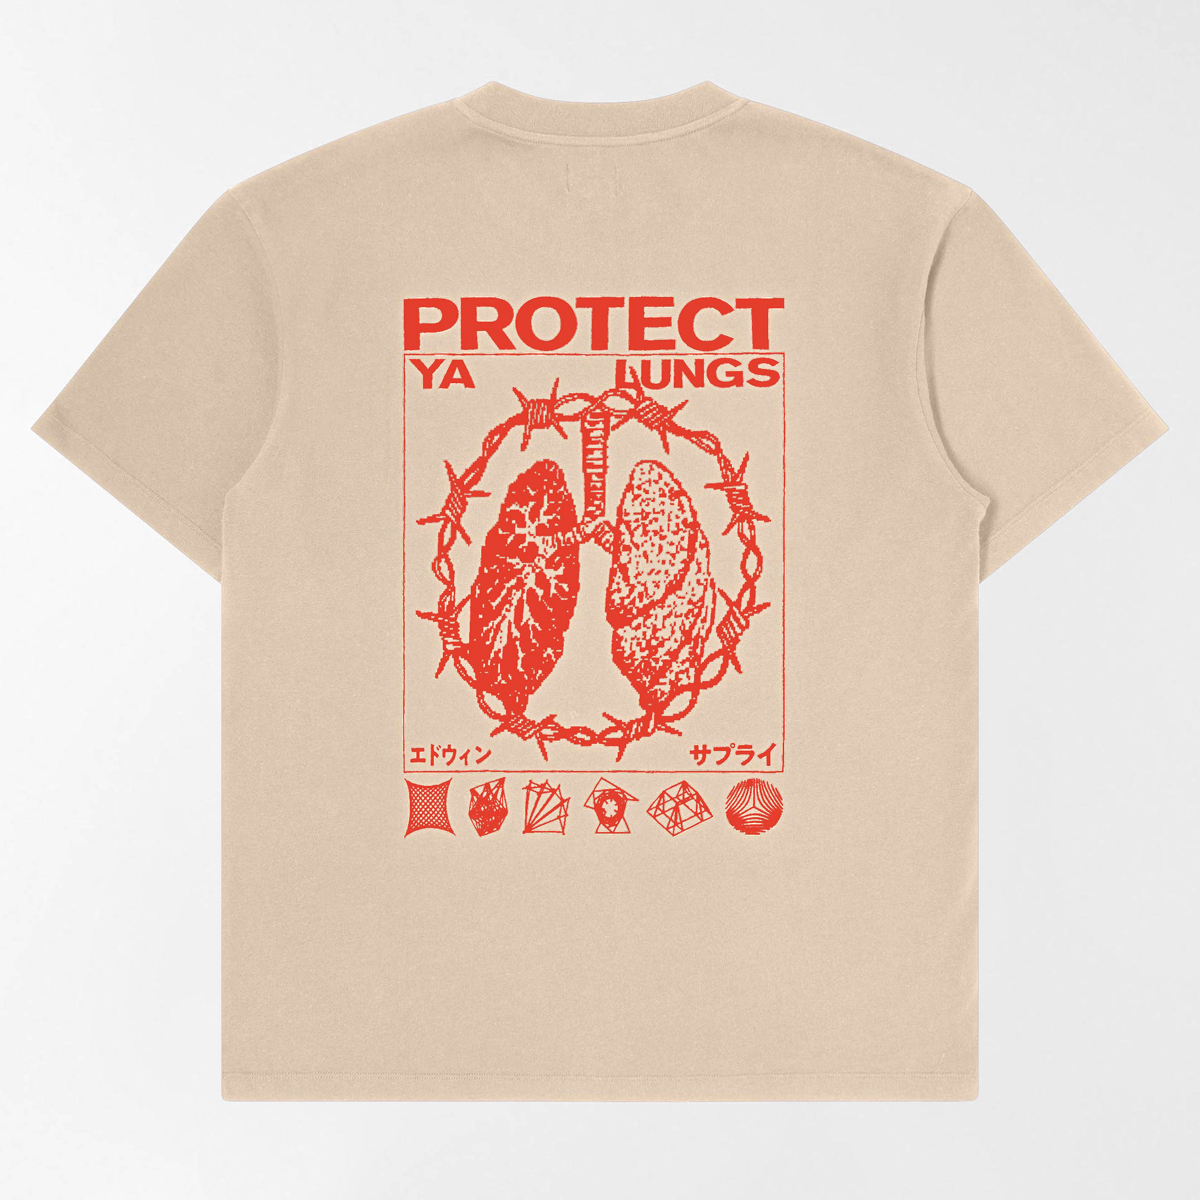 Protect Ya Lungs - Oversized Tee - White Pepper